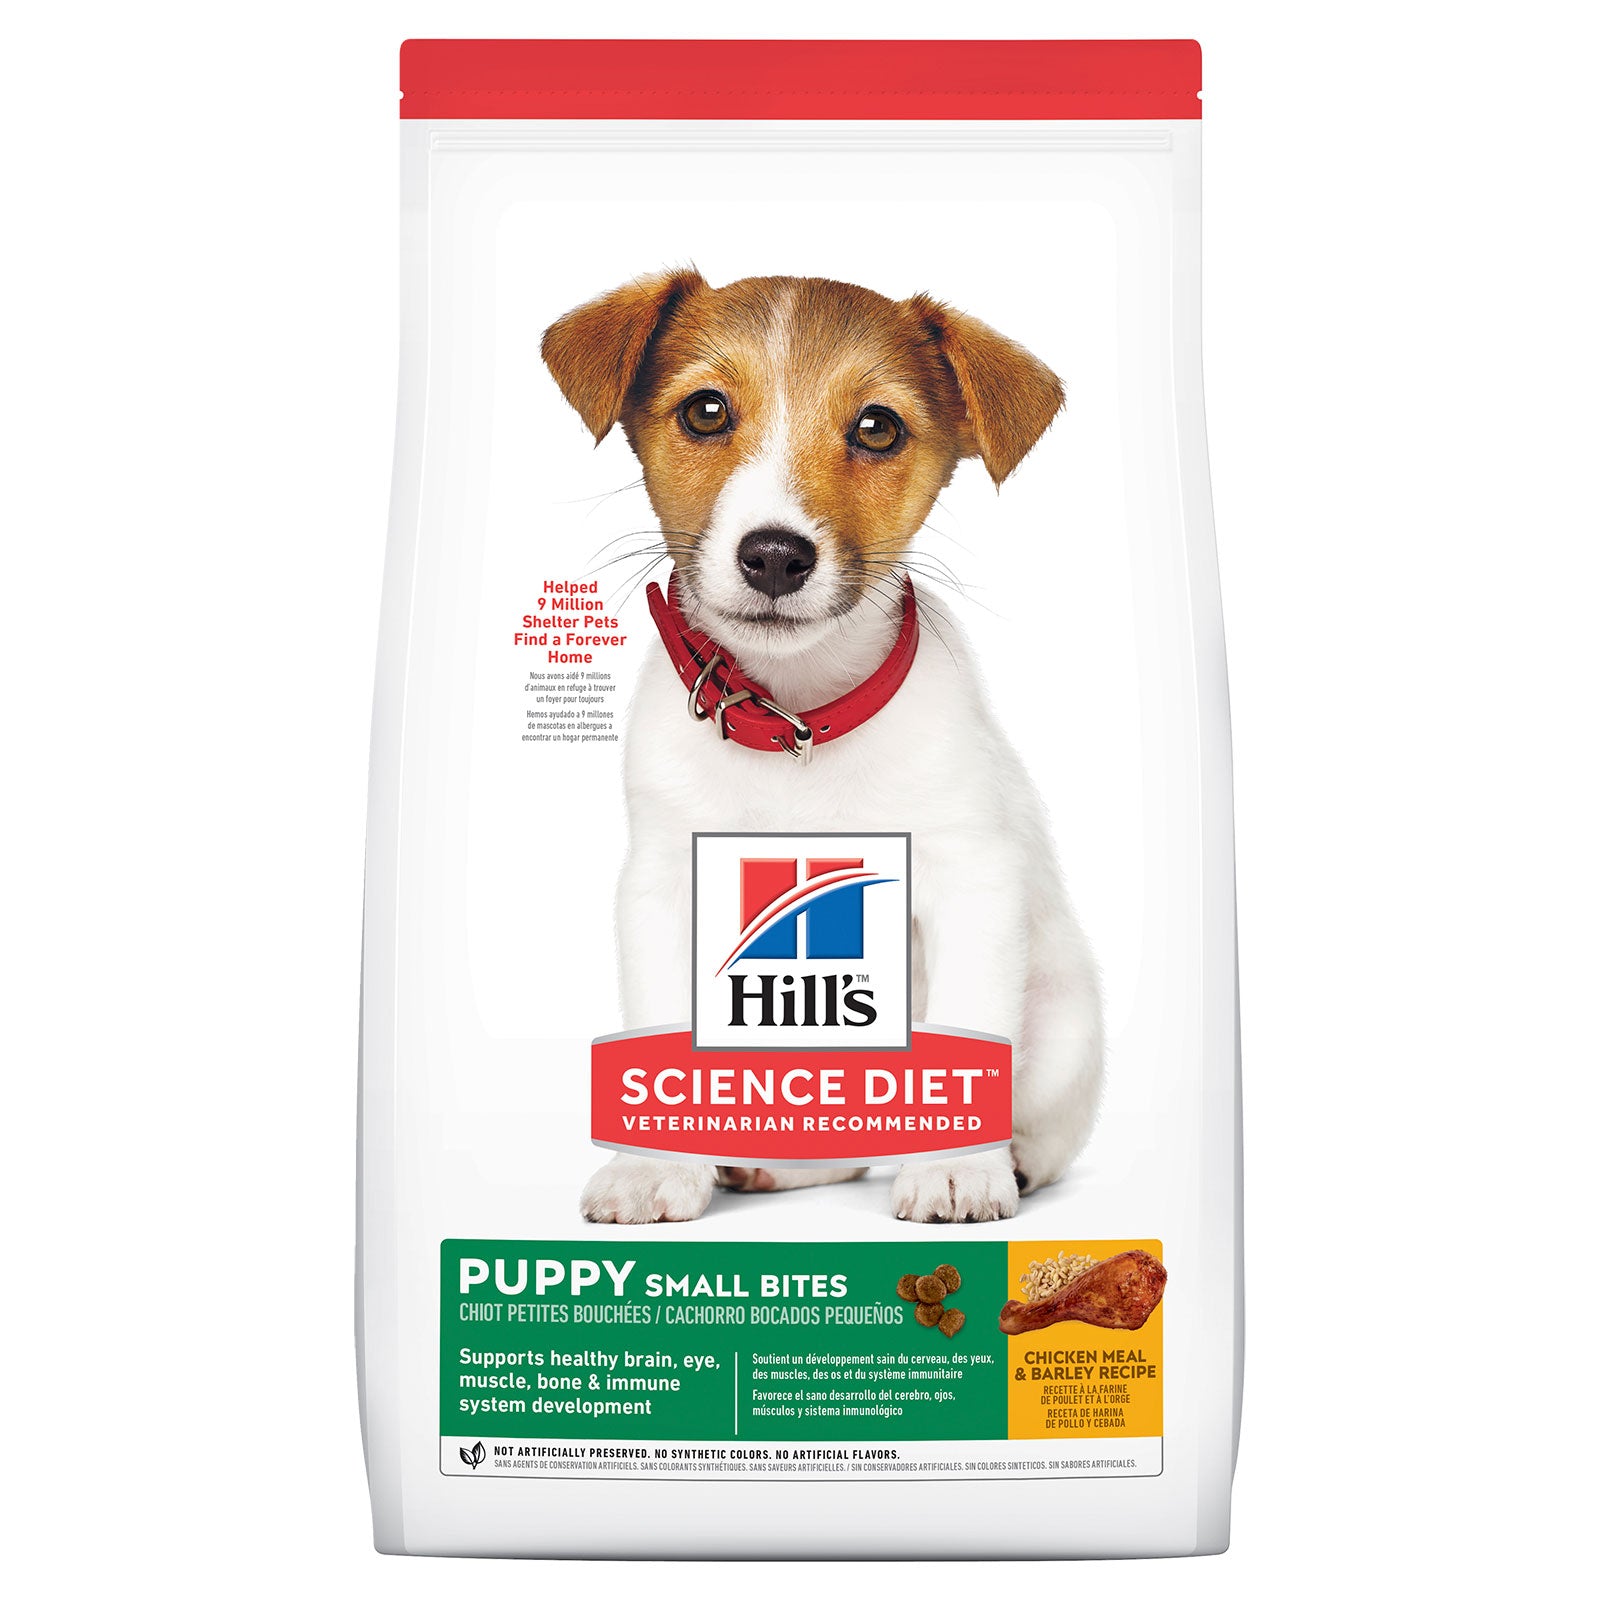 Hill's Science Diet Dog Food Puppy Small Bites